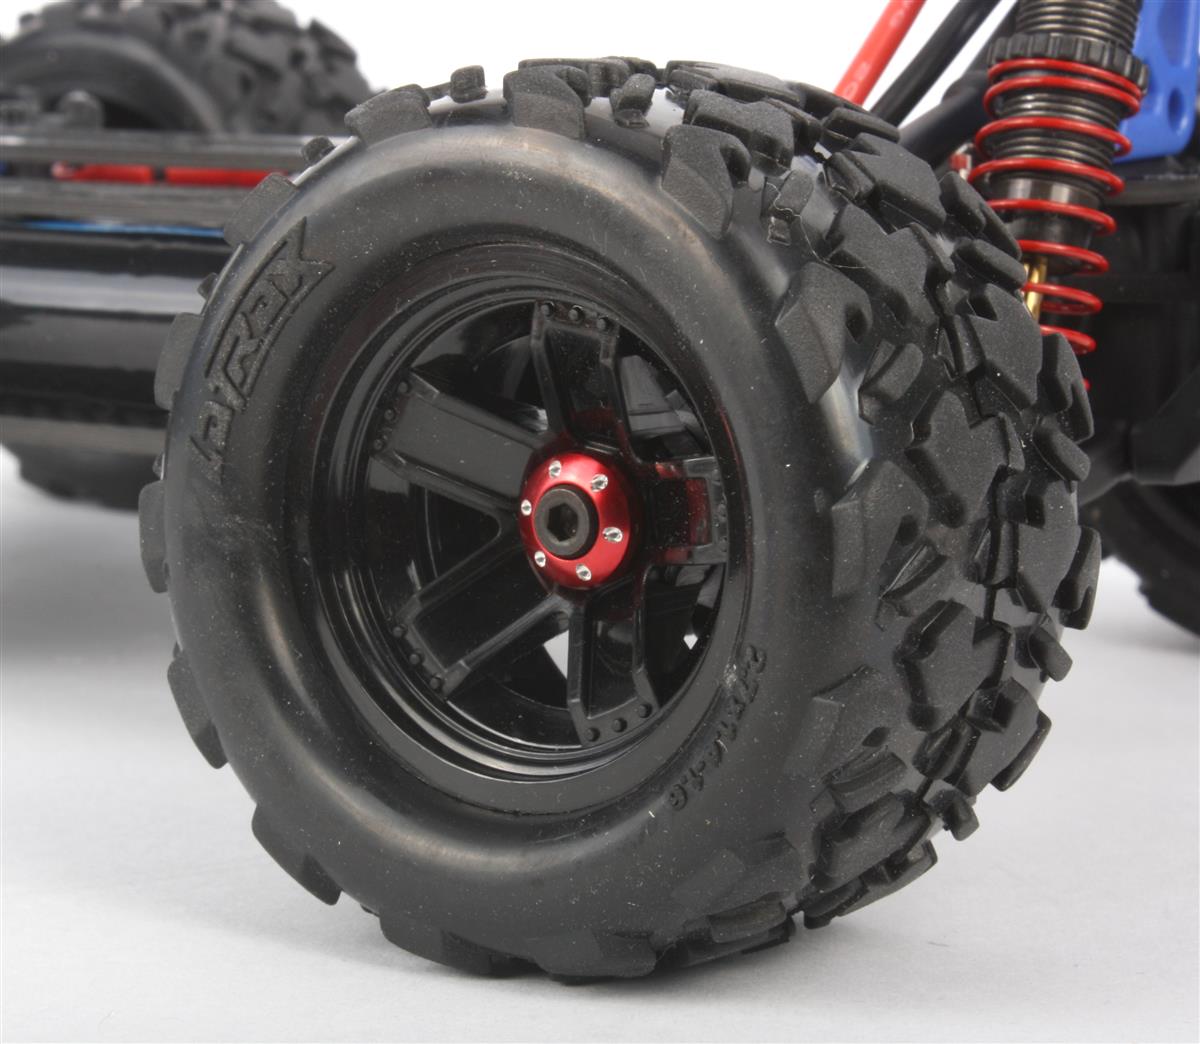 LaTrax Teton, Traxxas, Weekend Project, brushless, 2.4GHz, graphite chassis, aluminum shocks